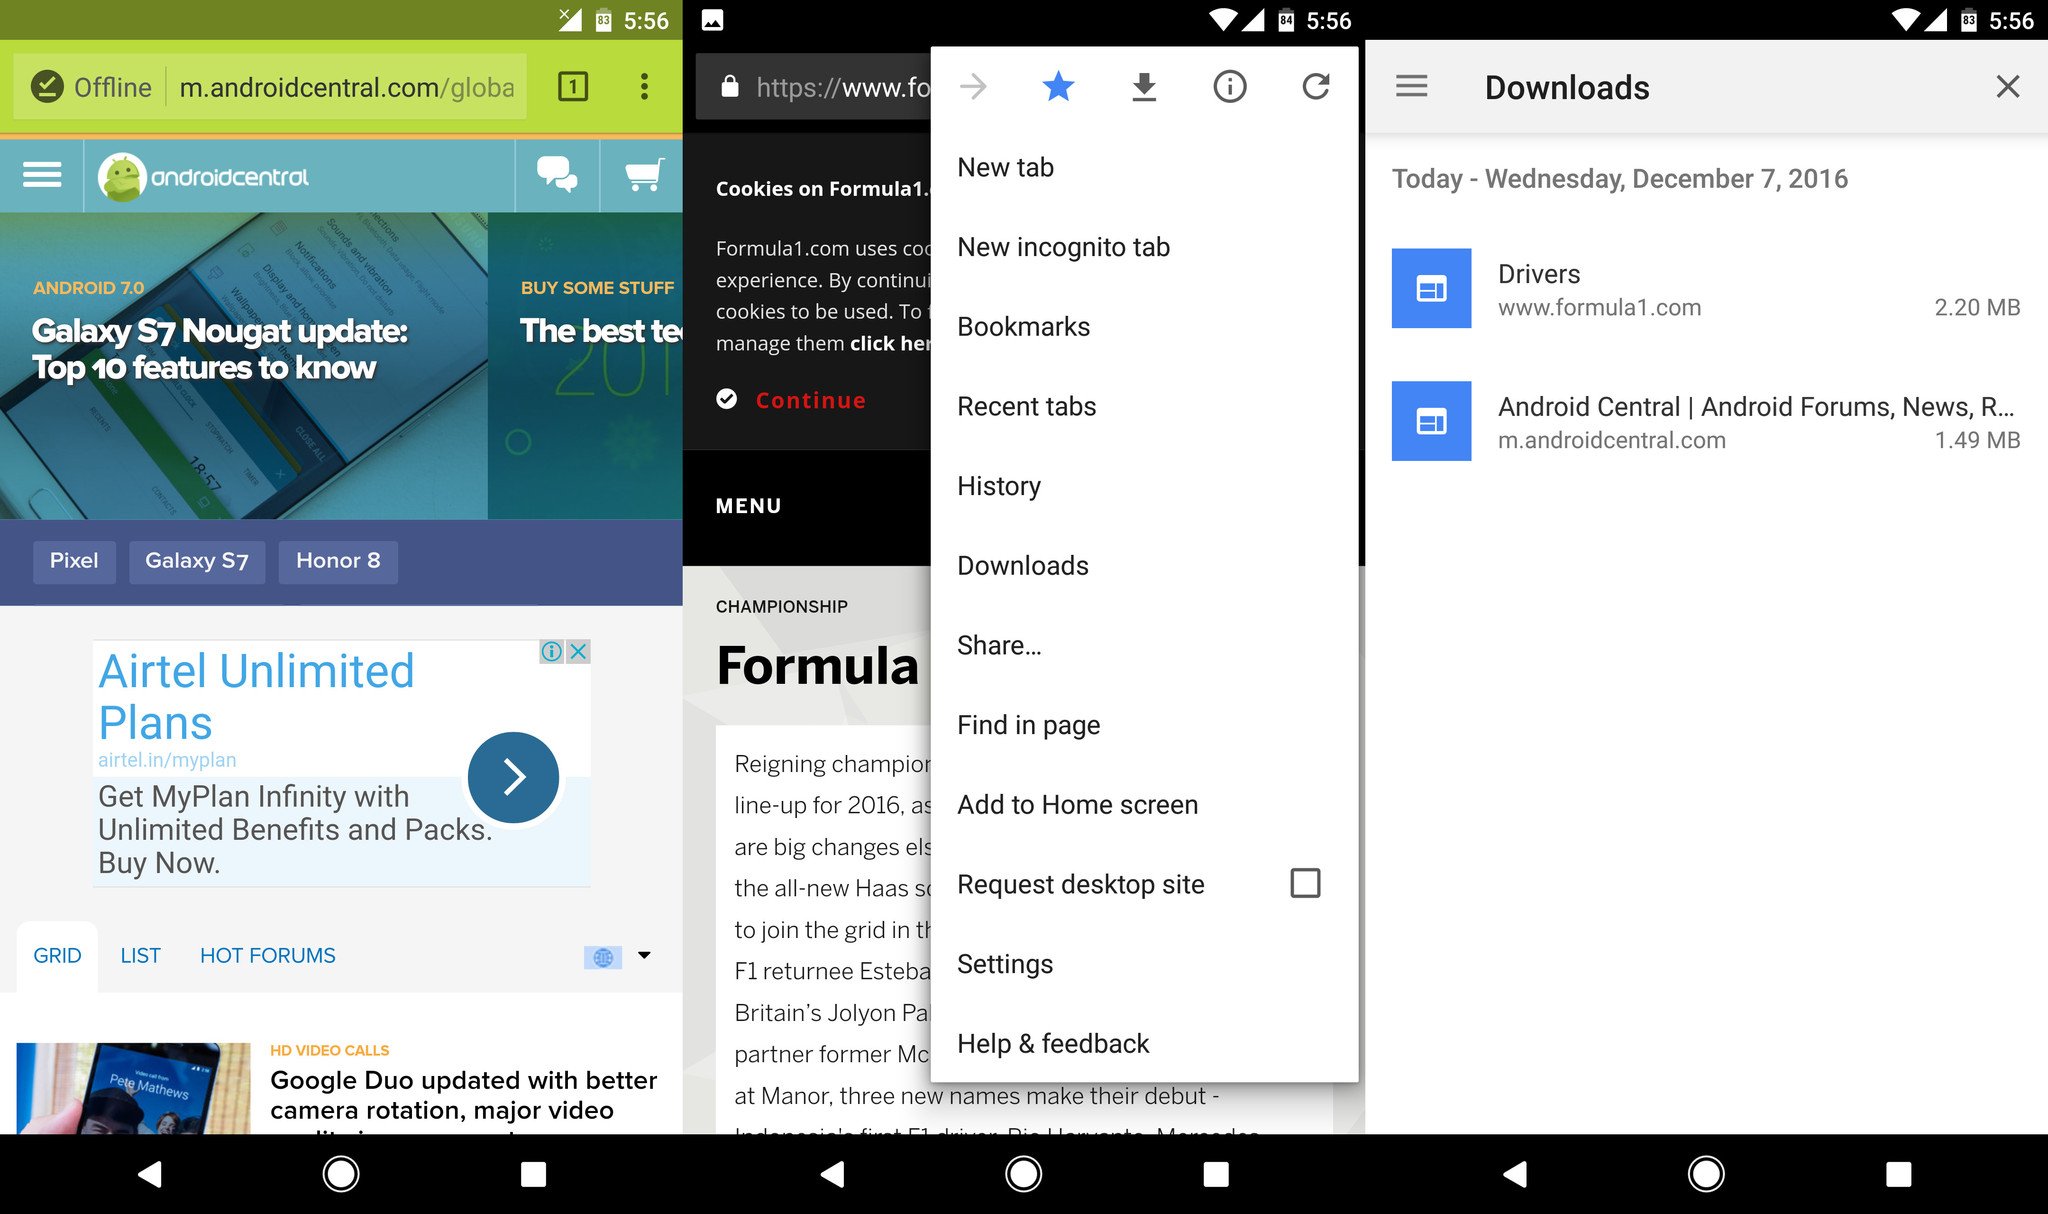 Chrome for Android downloads